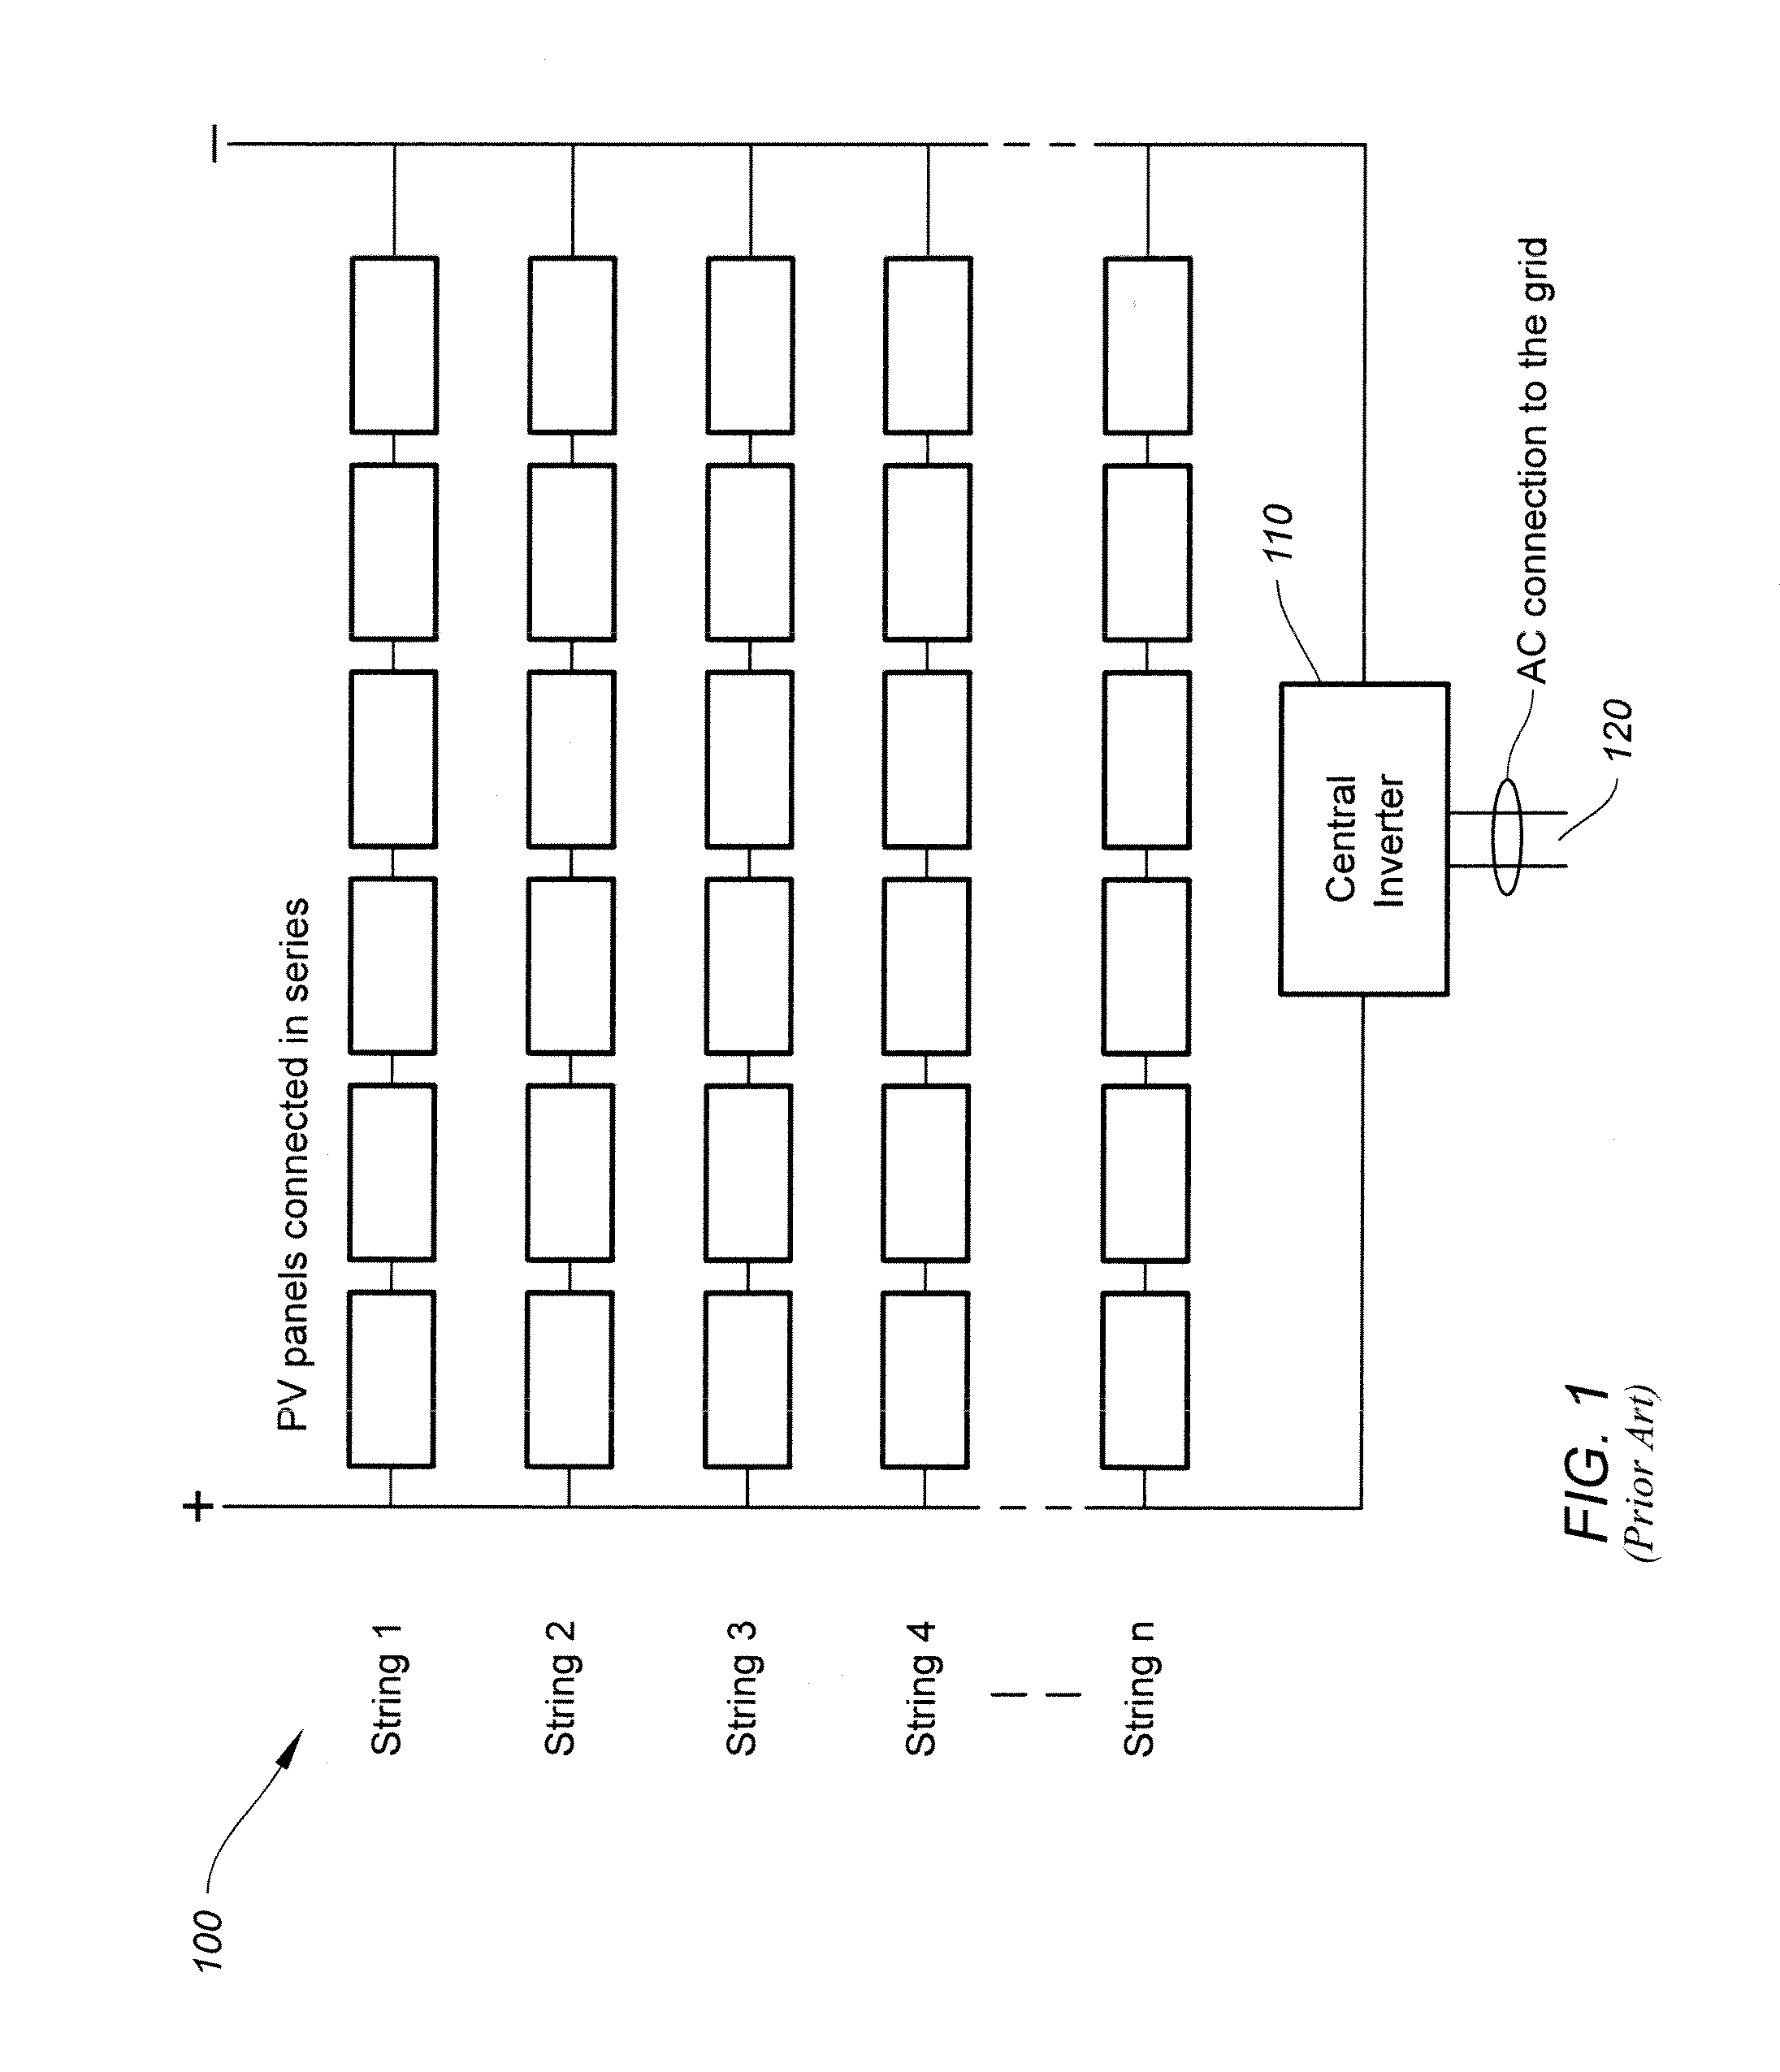 Vehicles and methods for magnetically managing legs of rail-based photovoltaic modules during installation